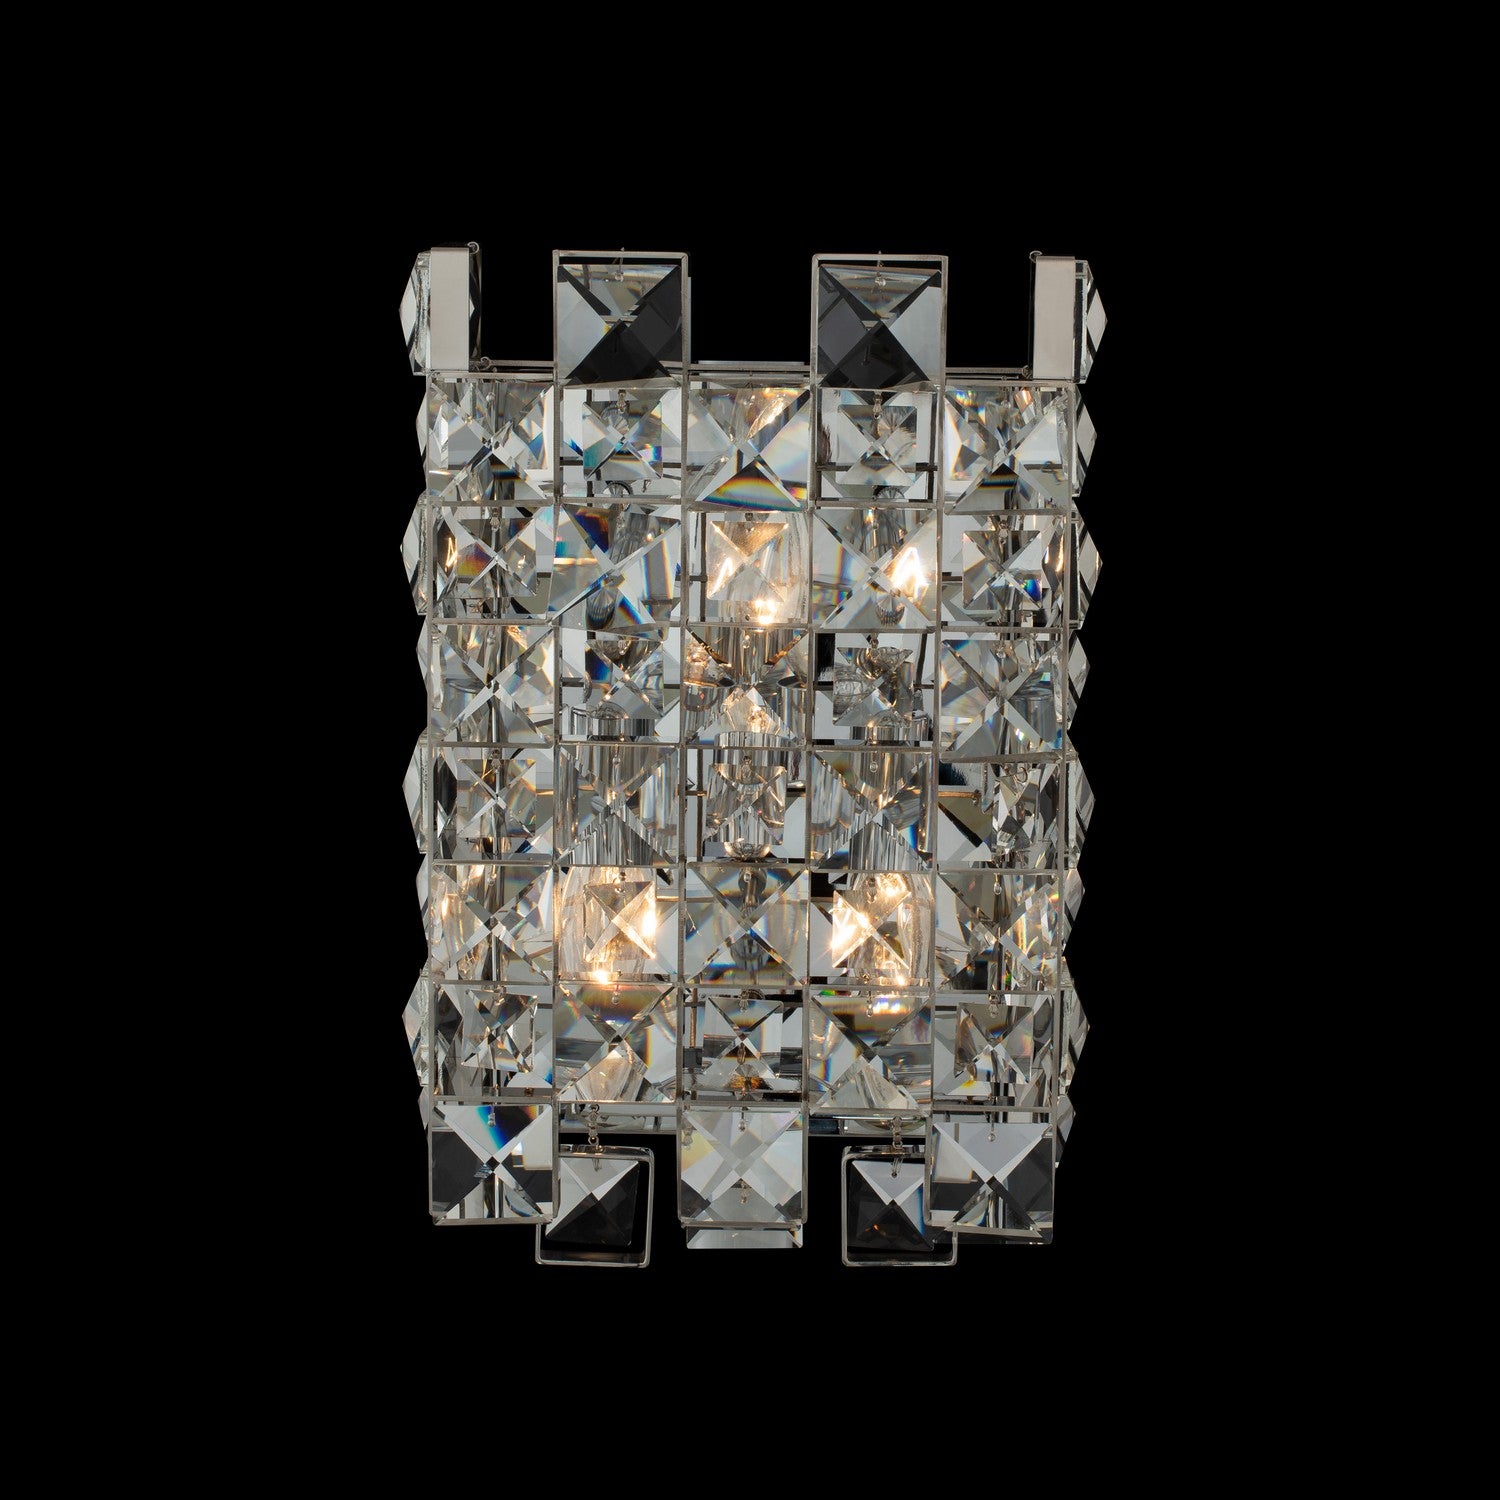 Allegri Piazze 9 Inch Wall Sconce